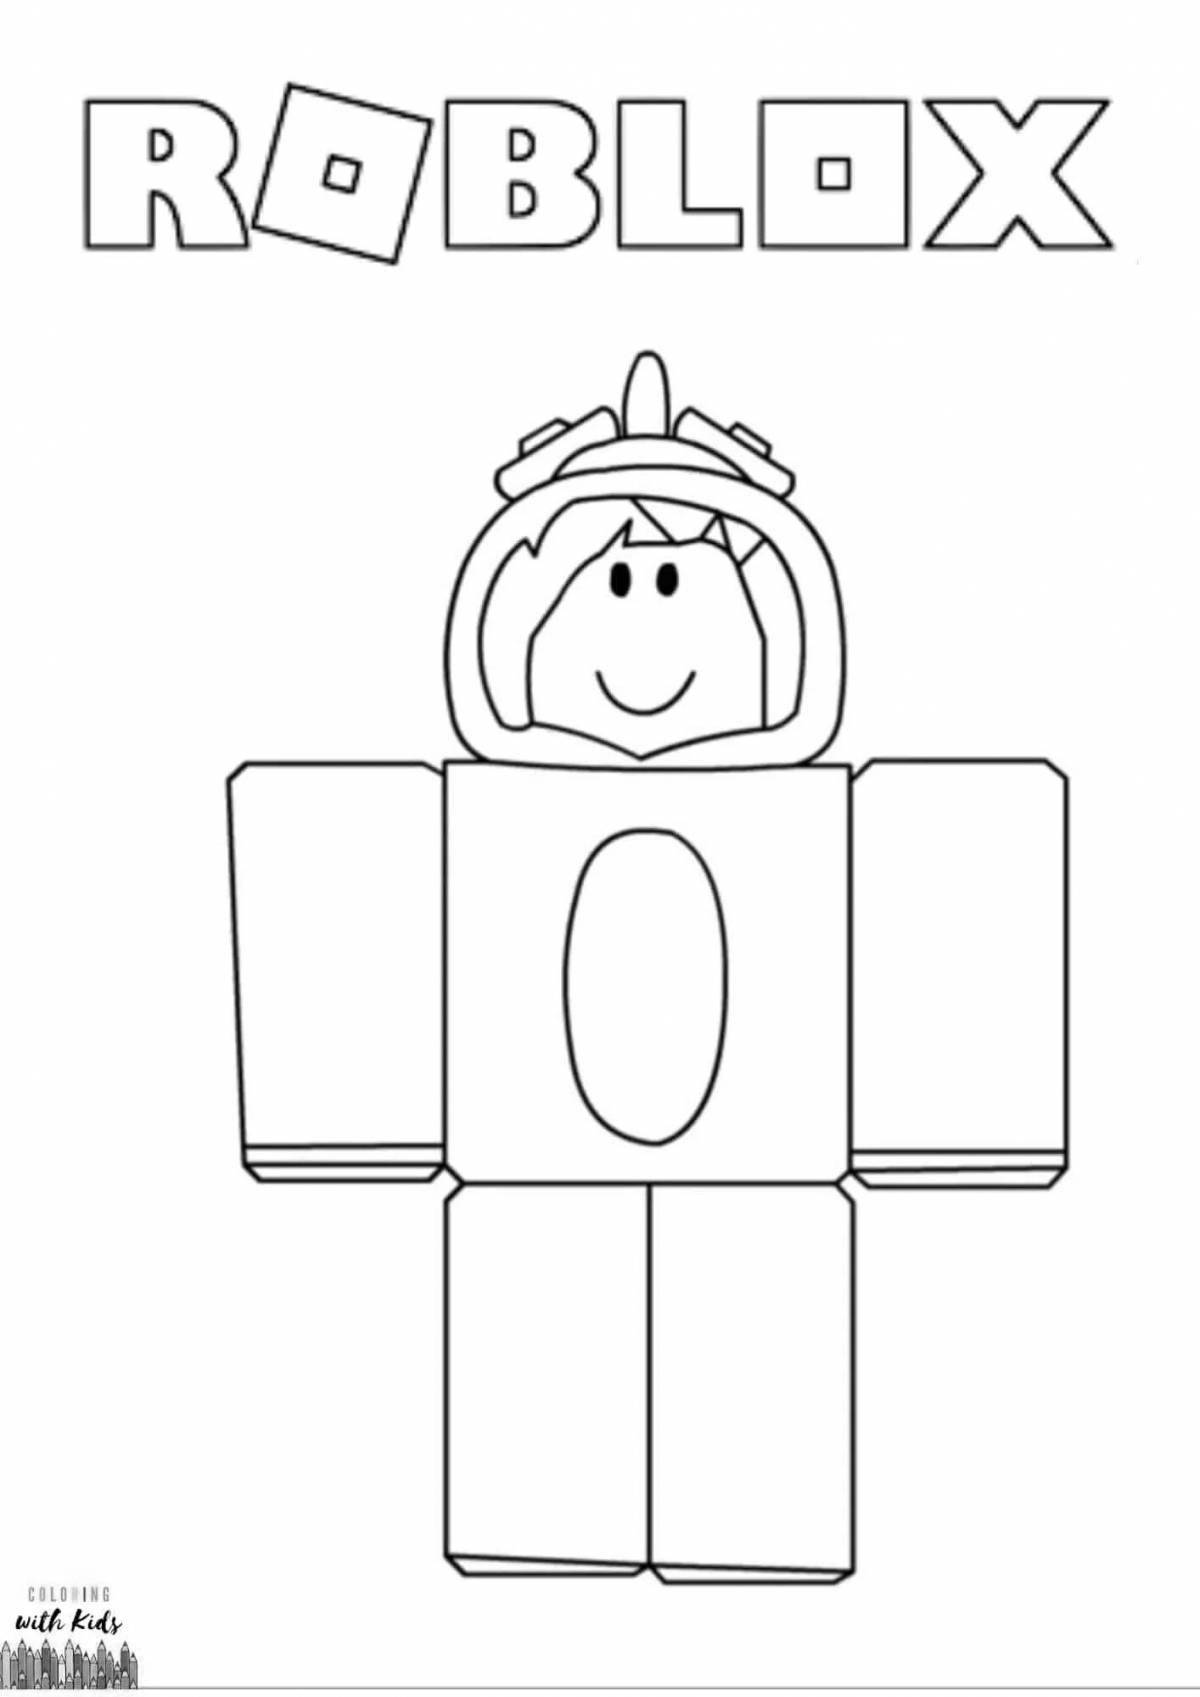 Awesome roblox avatar coloring page